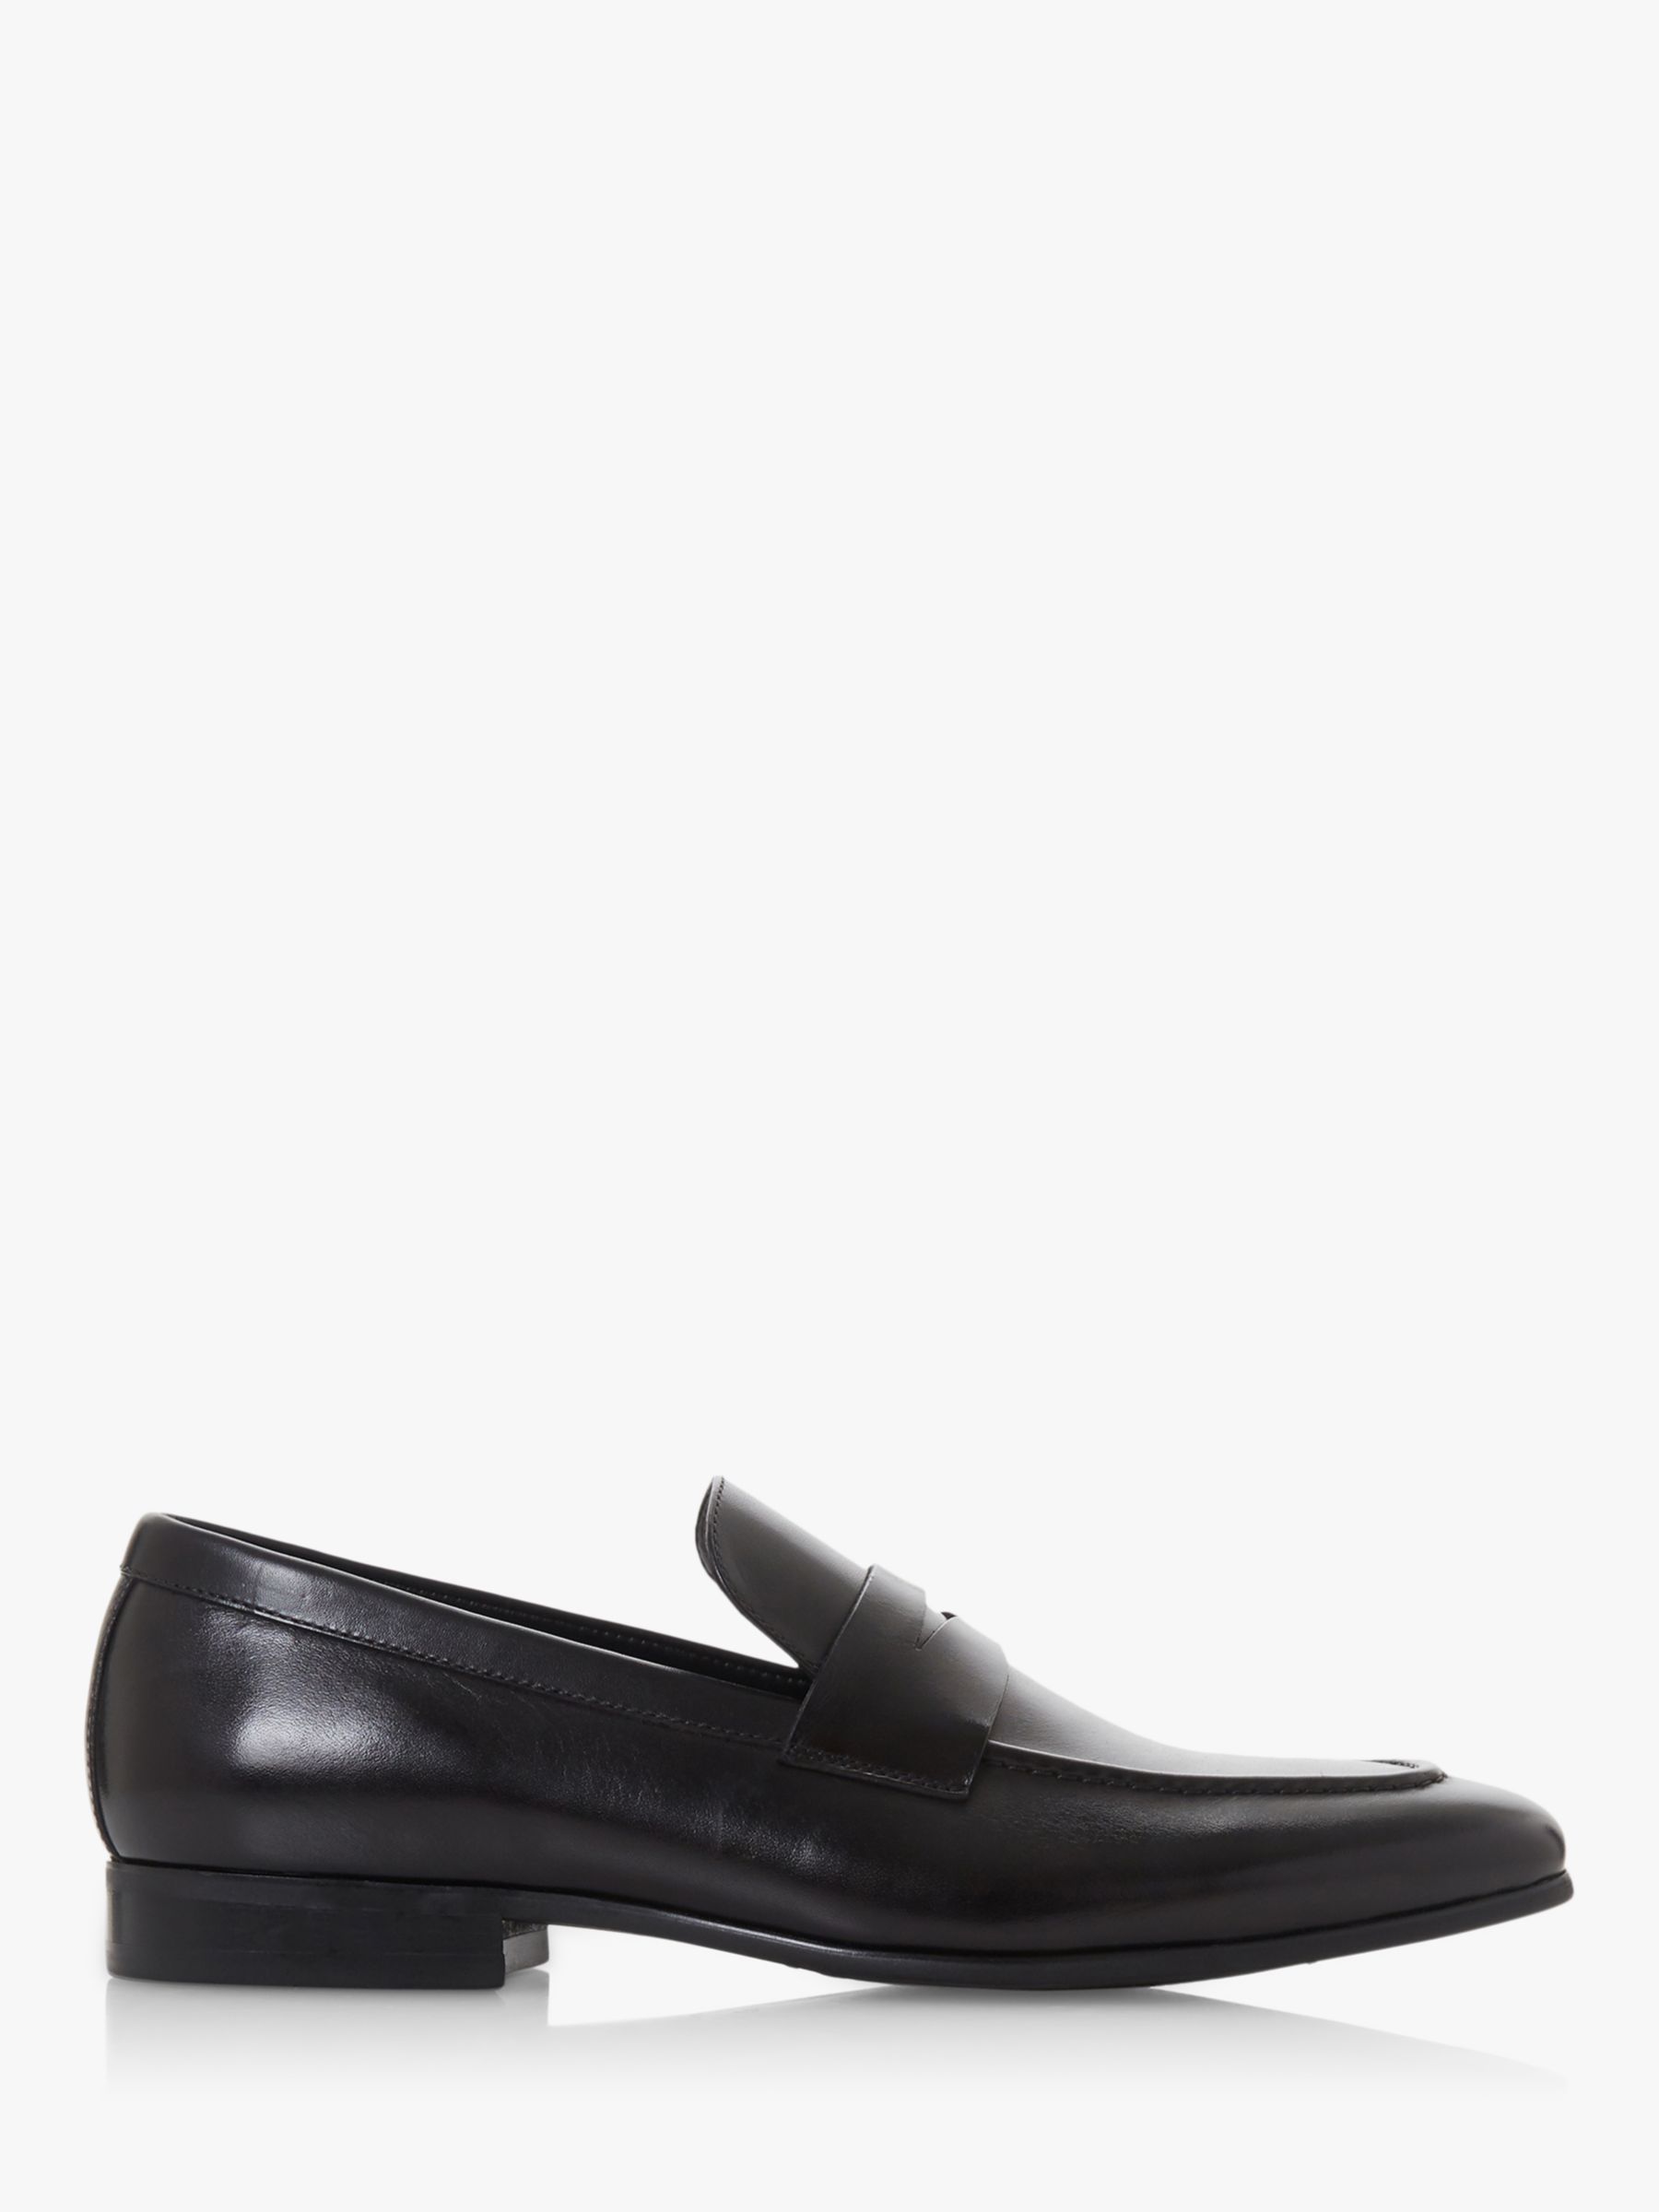 Dune Server Leather Loafers, Black at John Lewis & Partners